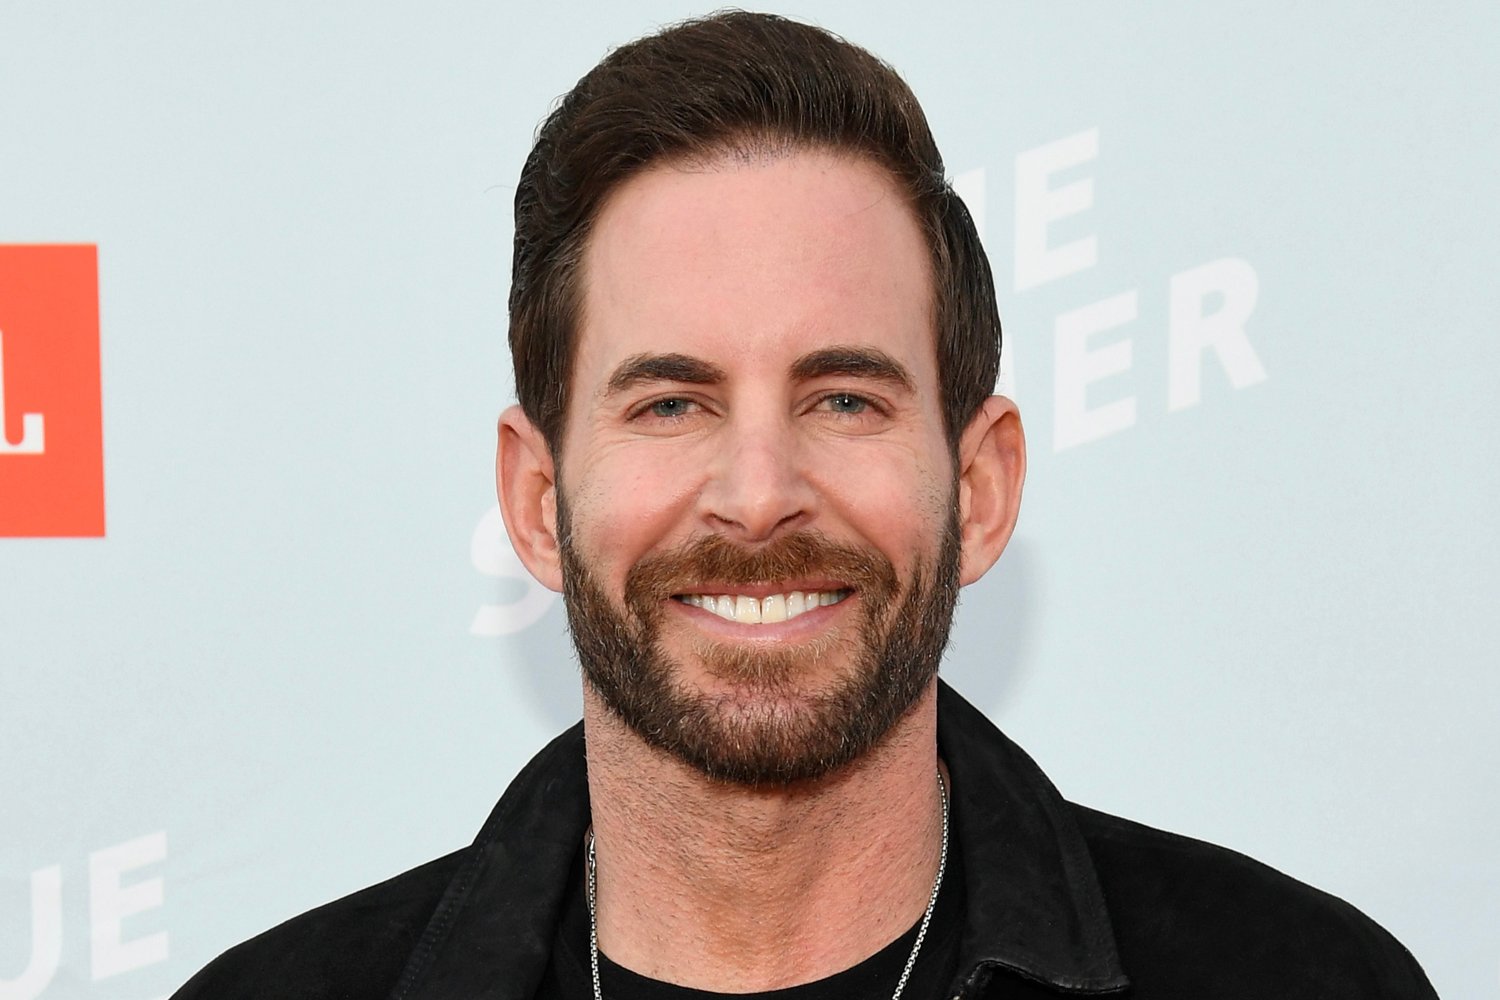 Tarek El Moussa smiles in front of a promotional backdrop